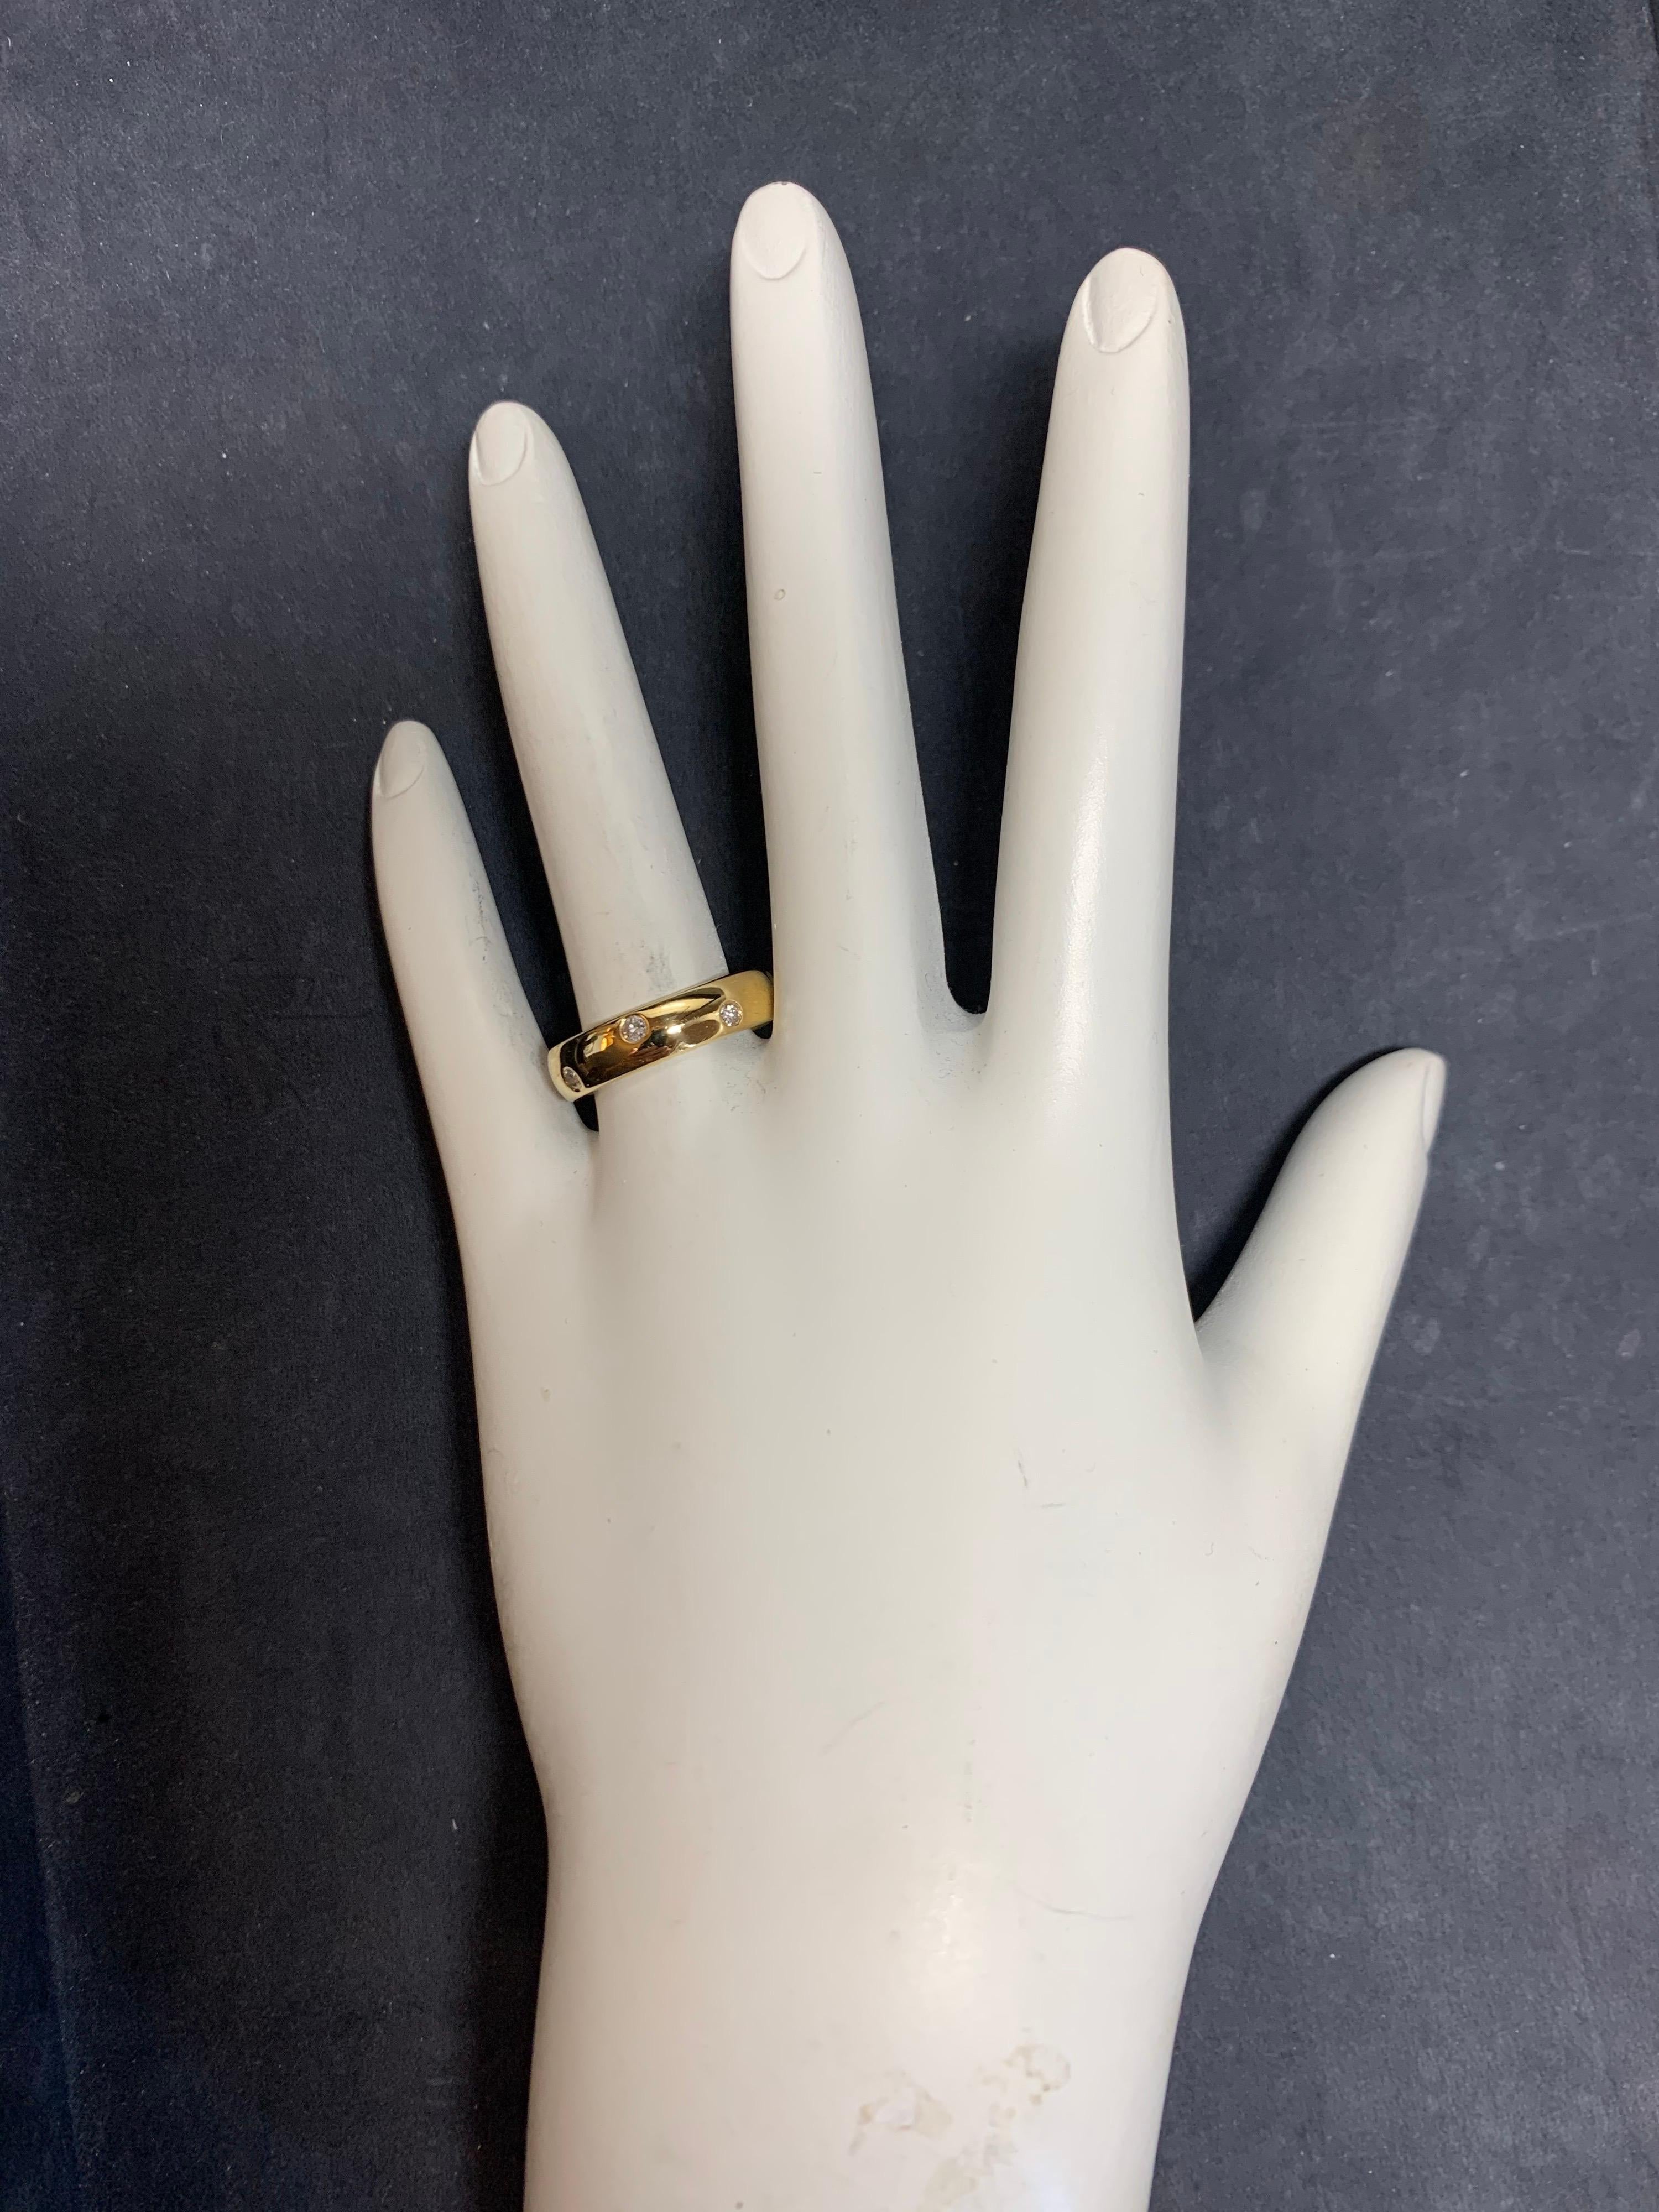 Modern 18k Yellow Gold Ring set with 8 Rounds,  0.45 Carat Natural Colorless Diamonds.

The ring size is 6.75, weight is 5.7 grams, and width is 4.7mm. 

Condition is Pre-owned. 